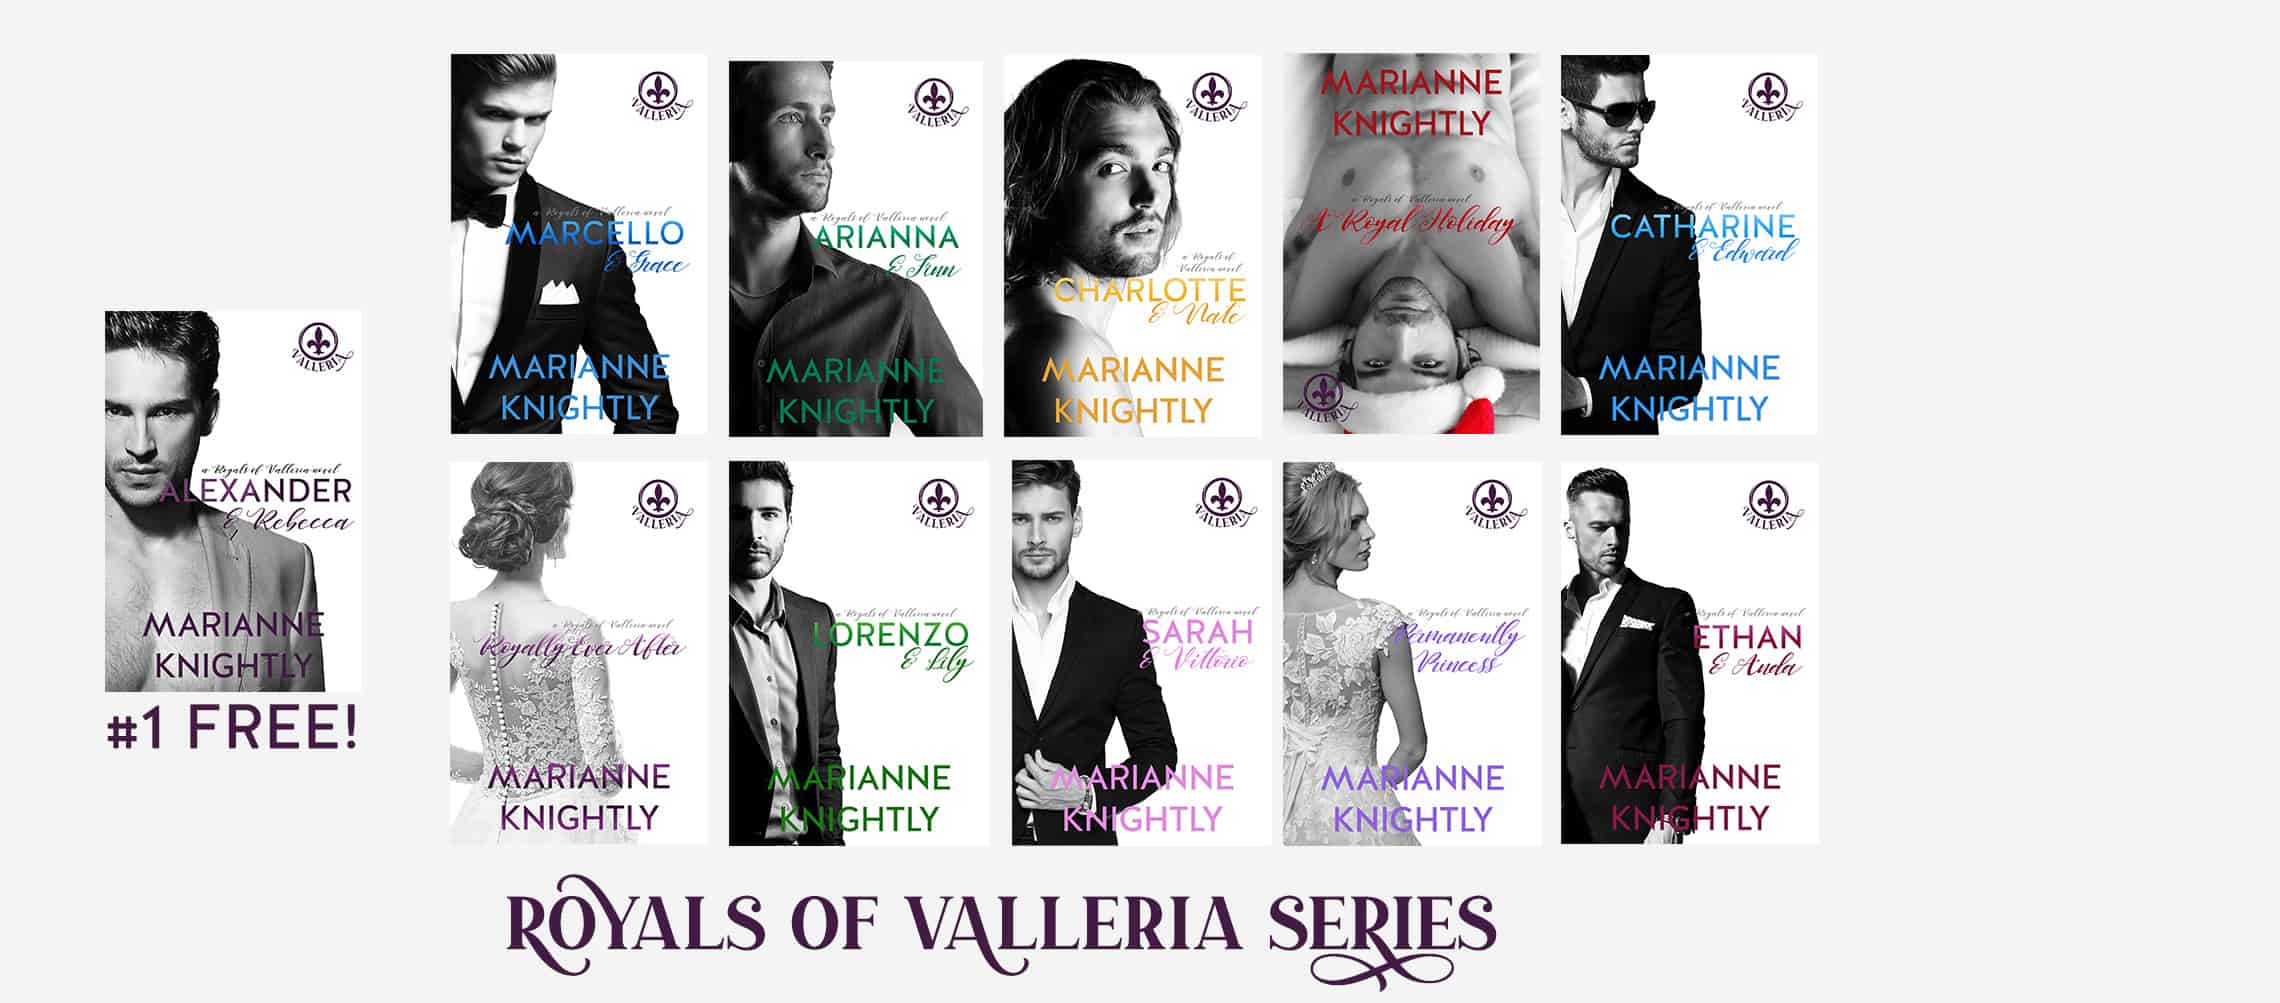 Royals of Valleria Series by Marianne Knightly